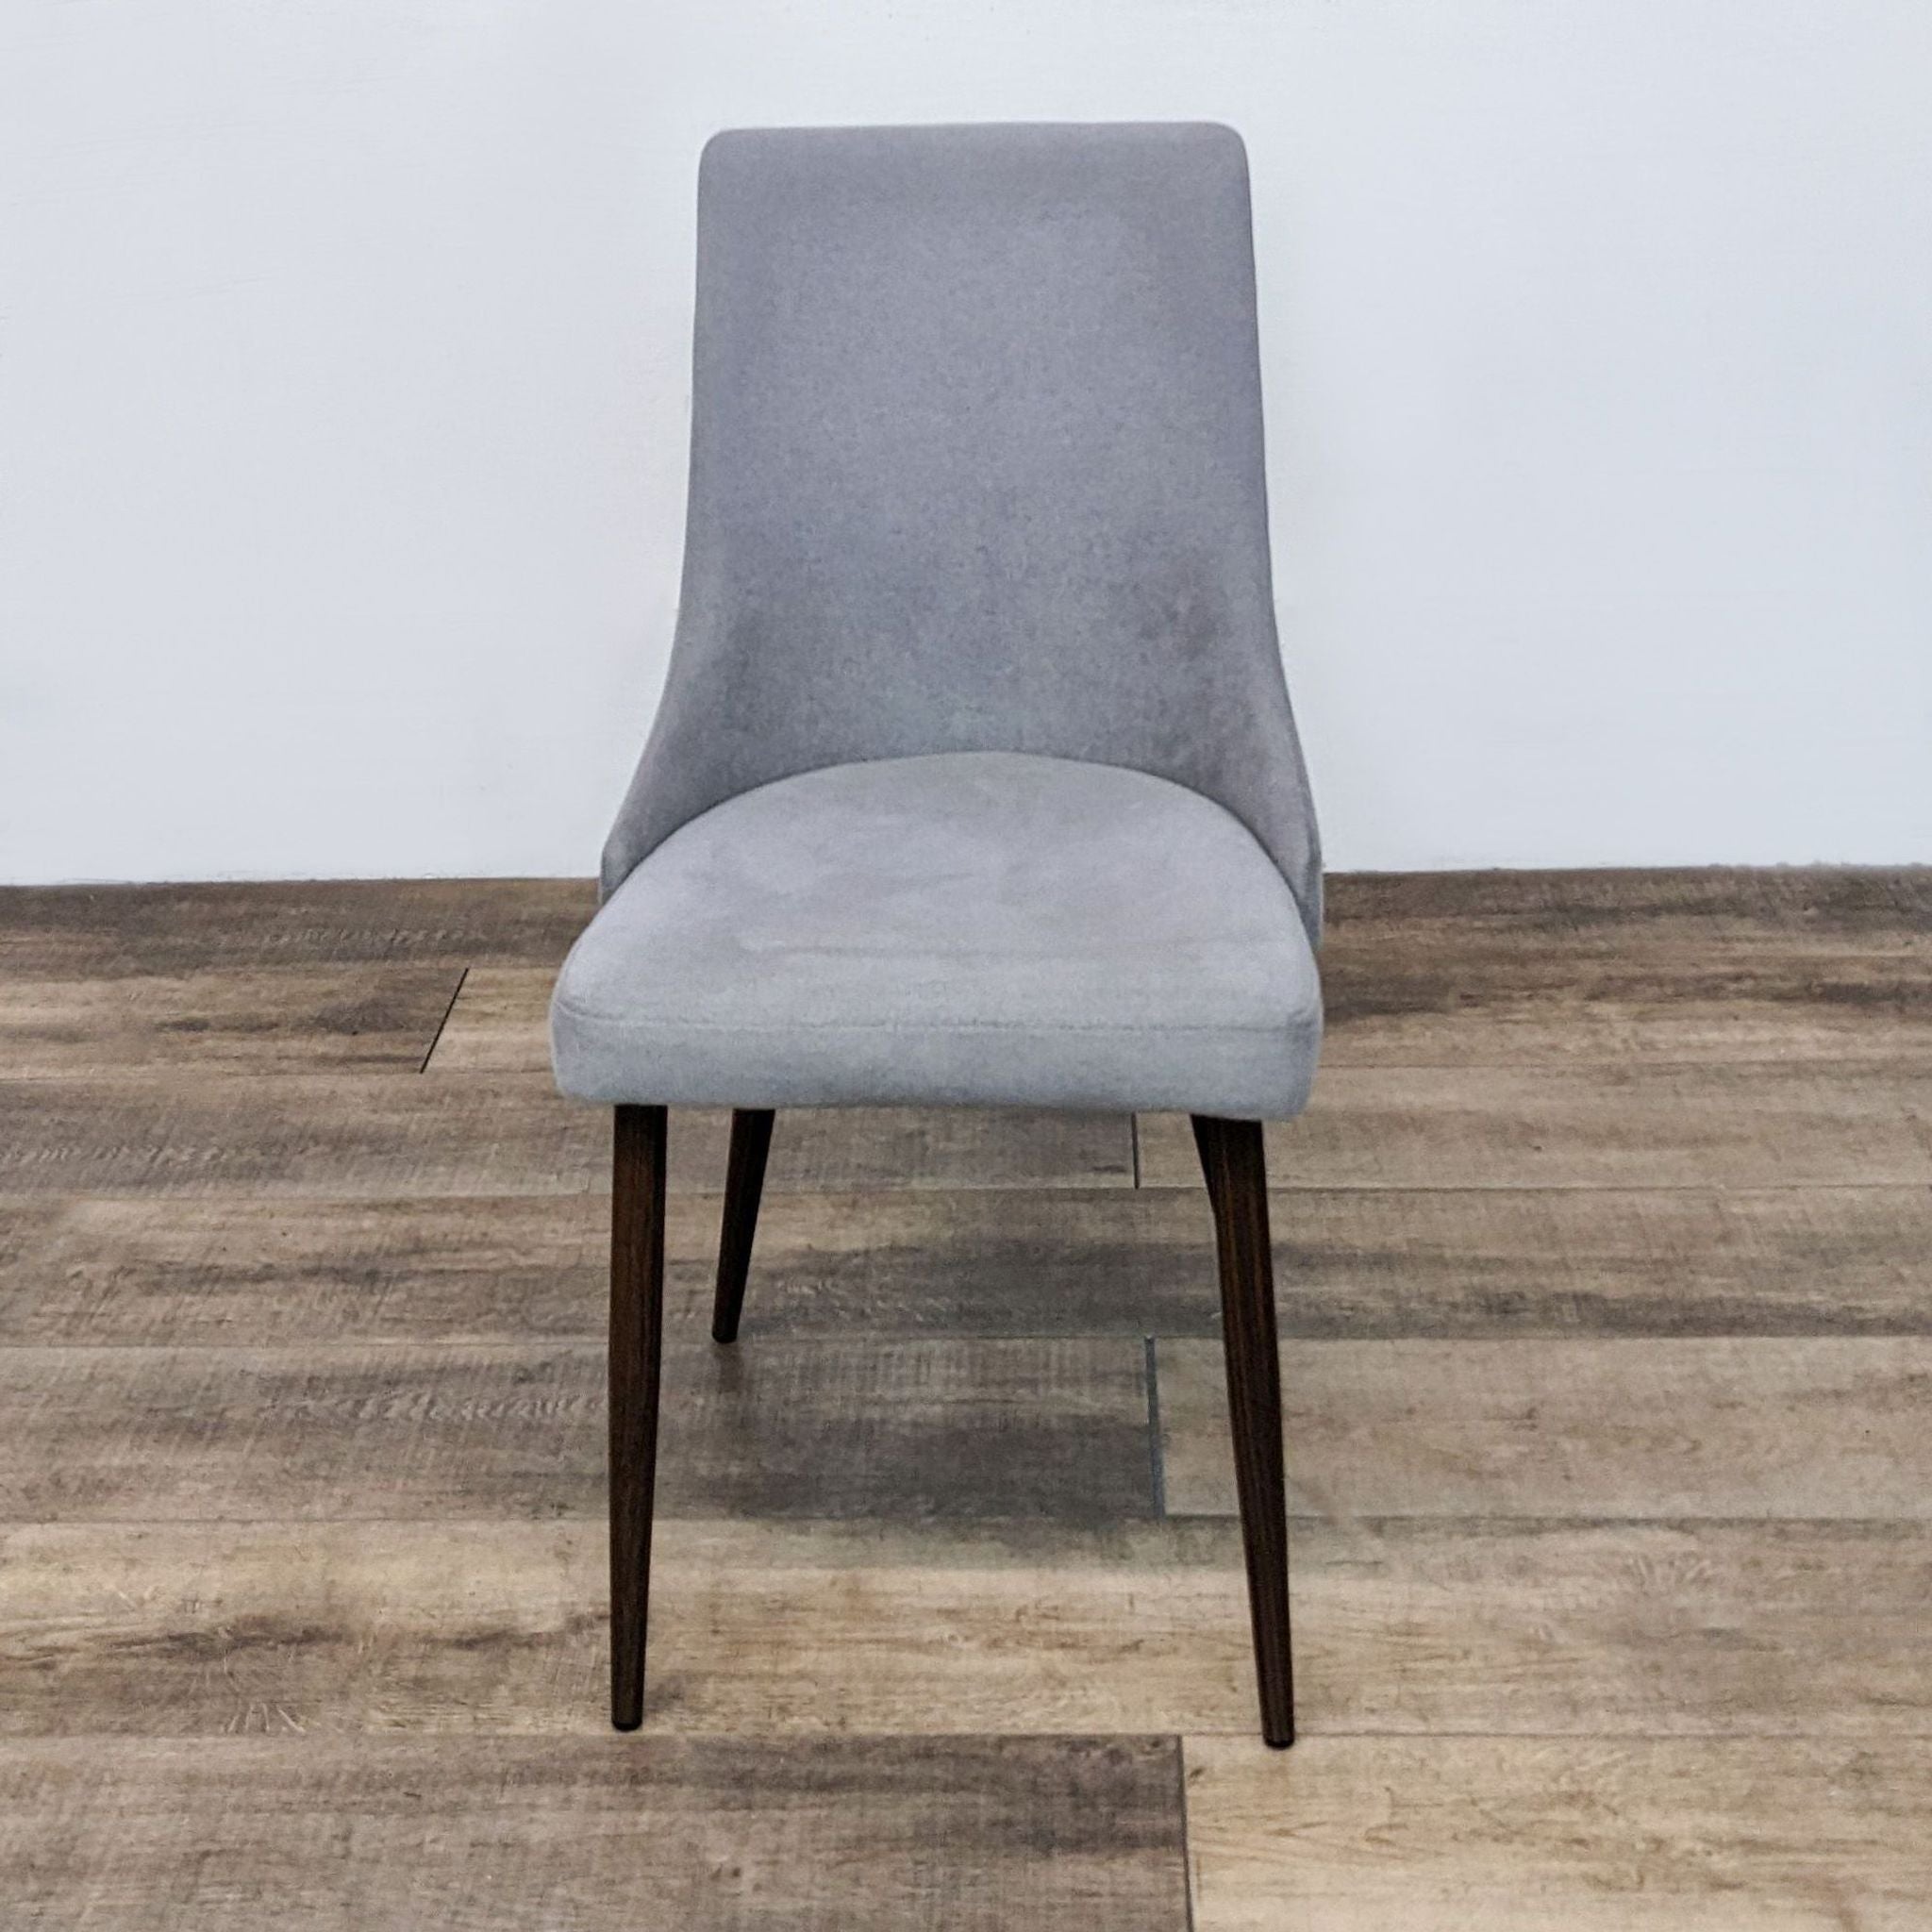 Reperch mid-century modern dining chair with cushioned gray fabric upholstery and curved wood seat frame on walnut-finish metal legs.